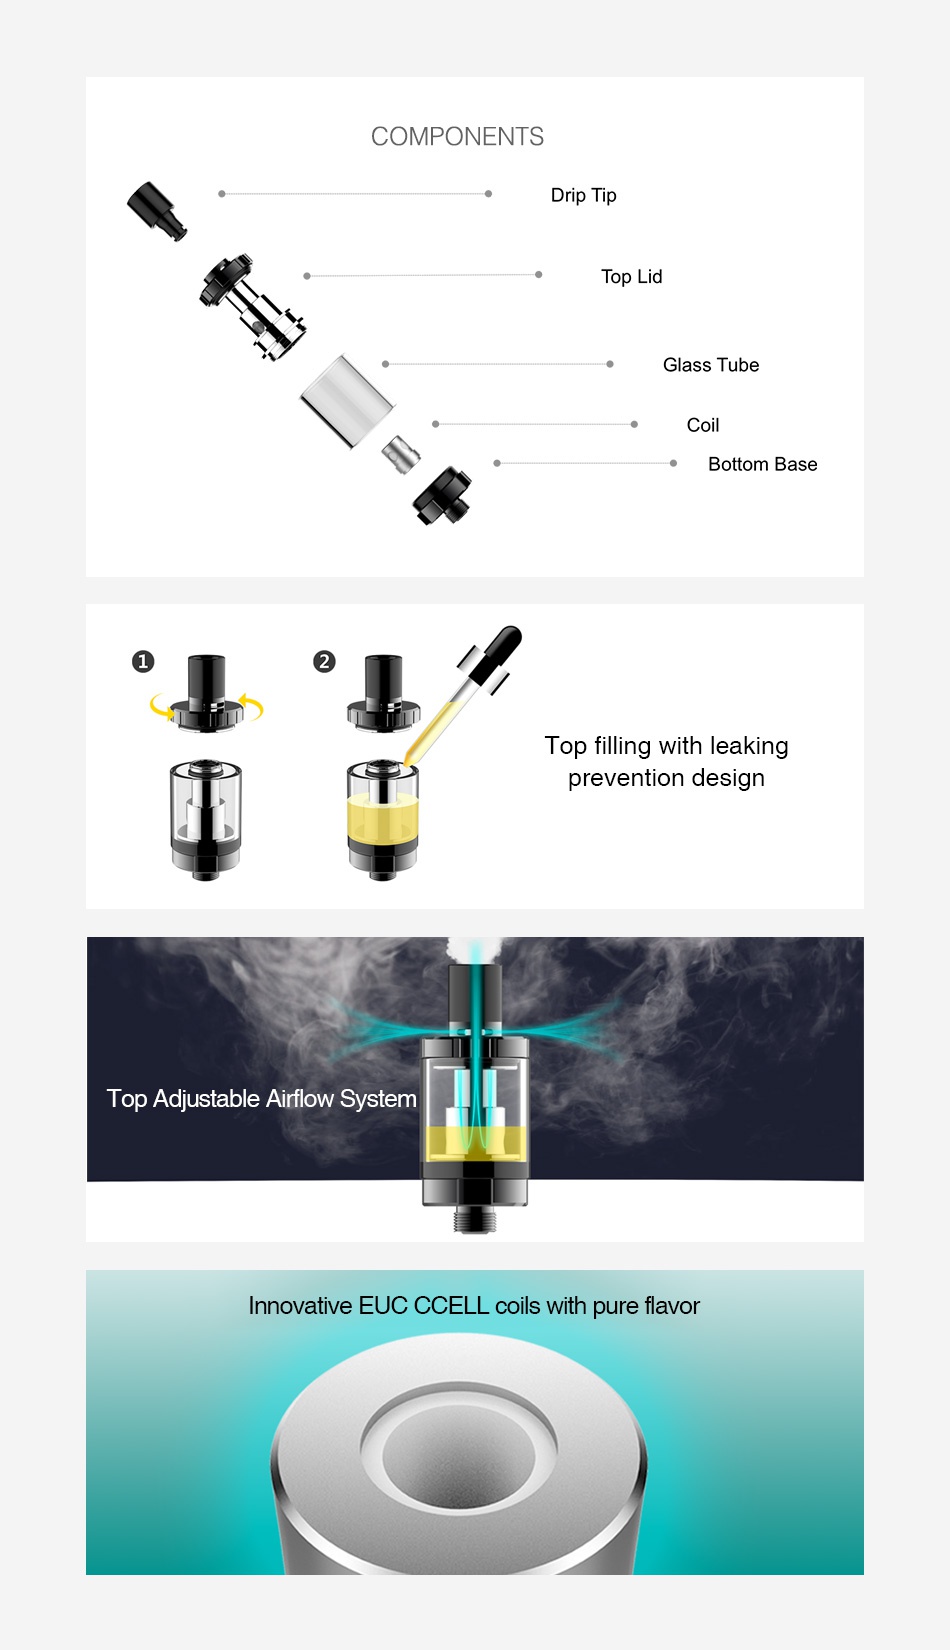 Vaporesso Drizzle Subohm Tank 1.8ml COMPONENTS rip Iip Glass Tub Coil Bottom base Top filling with leaking prevention design Top Adjustable Airflow System Innovative EUC CCELL coils with pure flavor